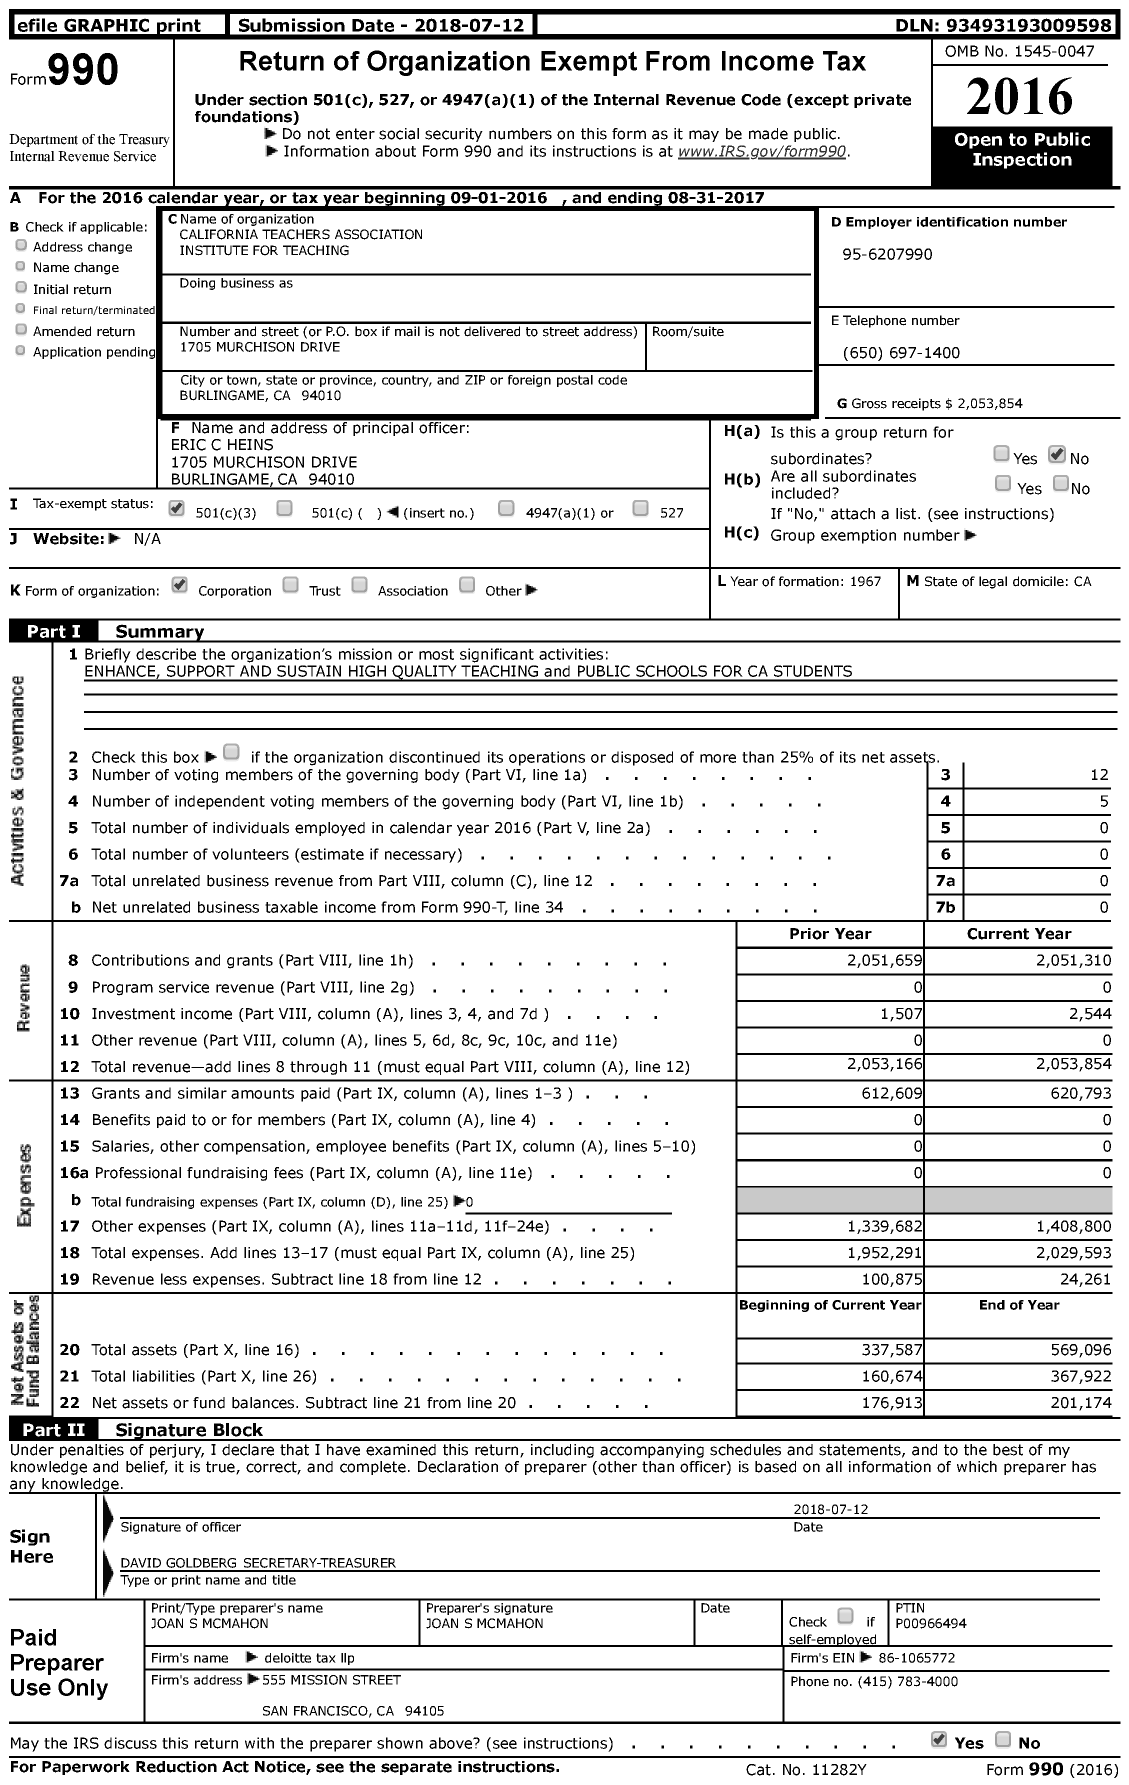 Image of first page of 2016 Form 990 for California Teachers Association Institute for Teaching